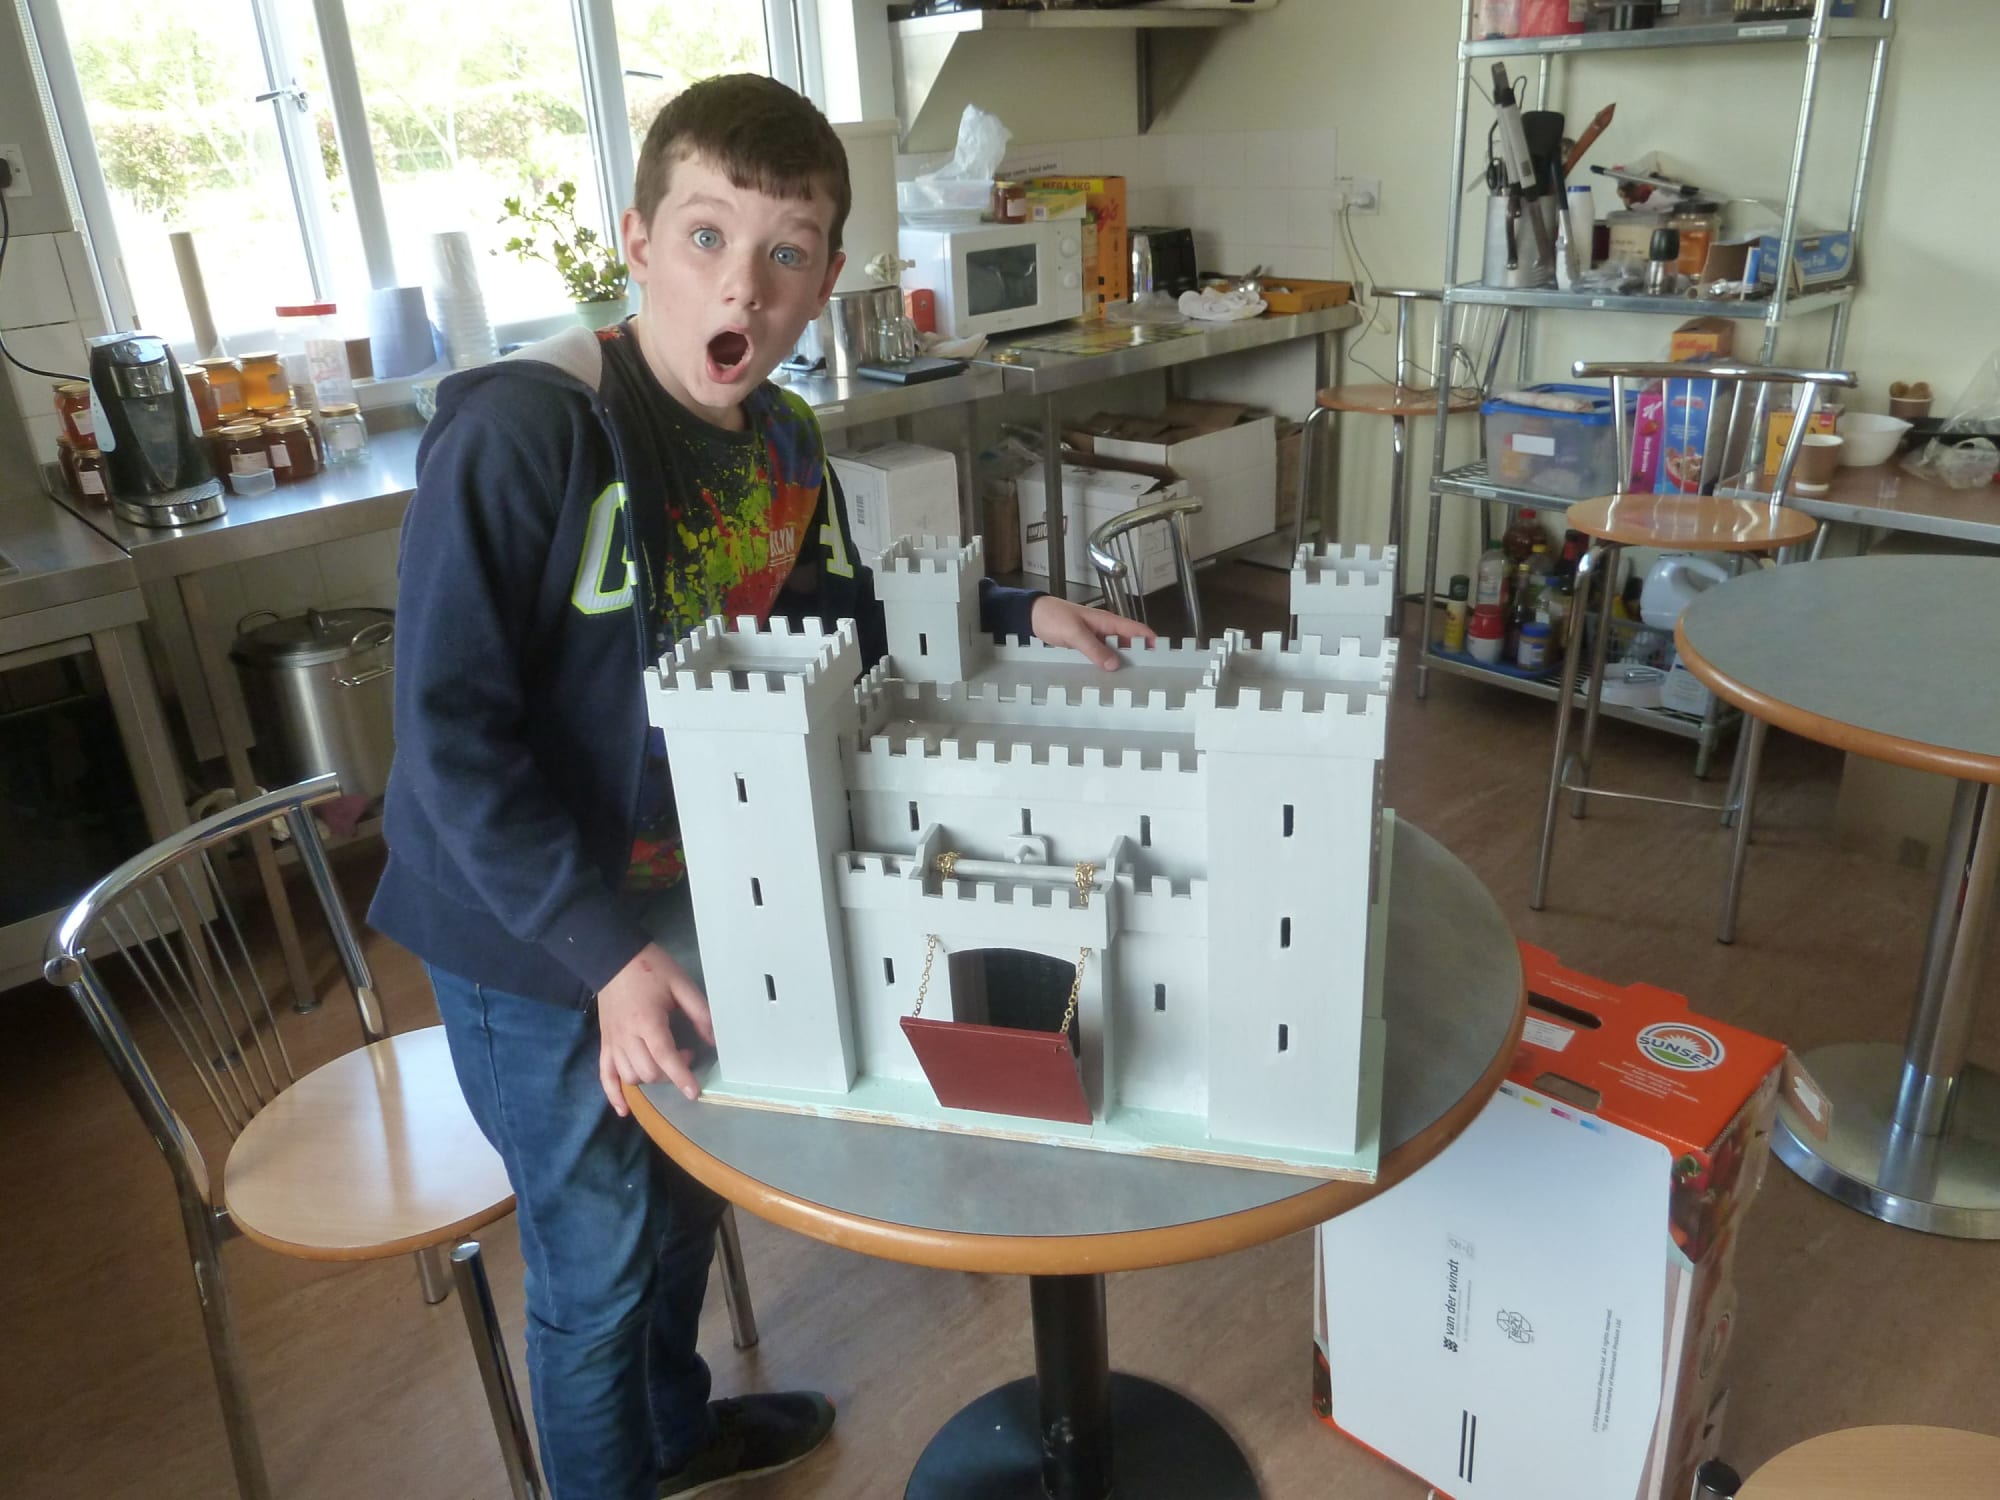 A young person poses with the toy castle he built in woodworking sessions.